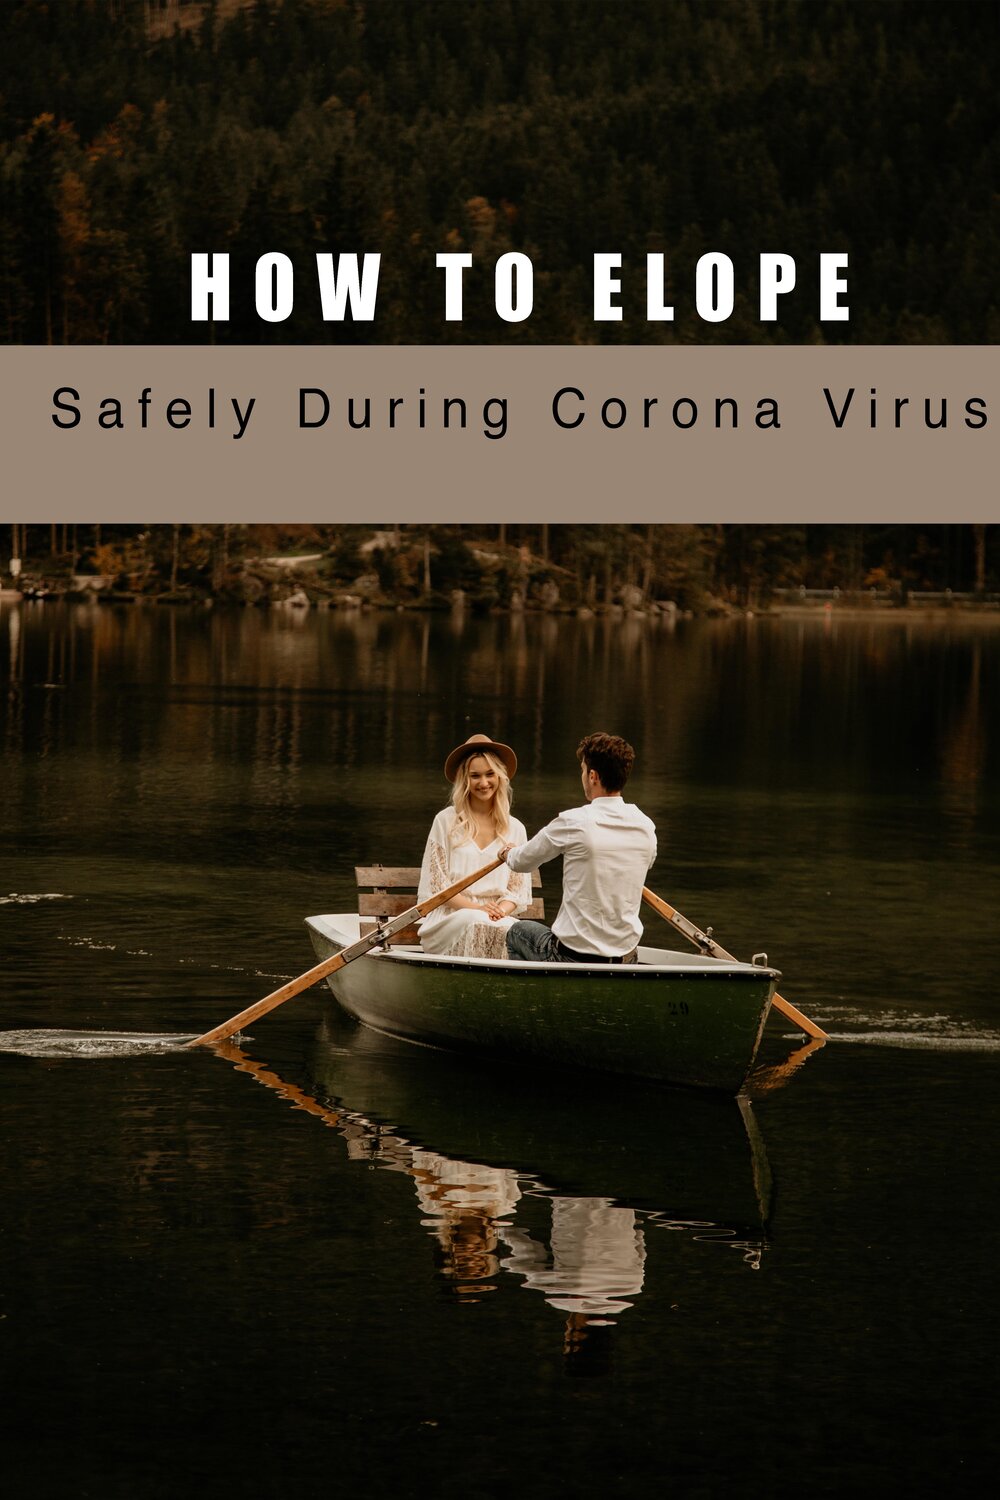 how to safely elope during corona virus